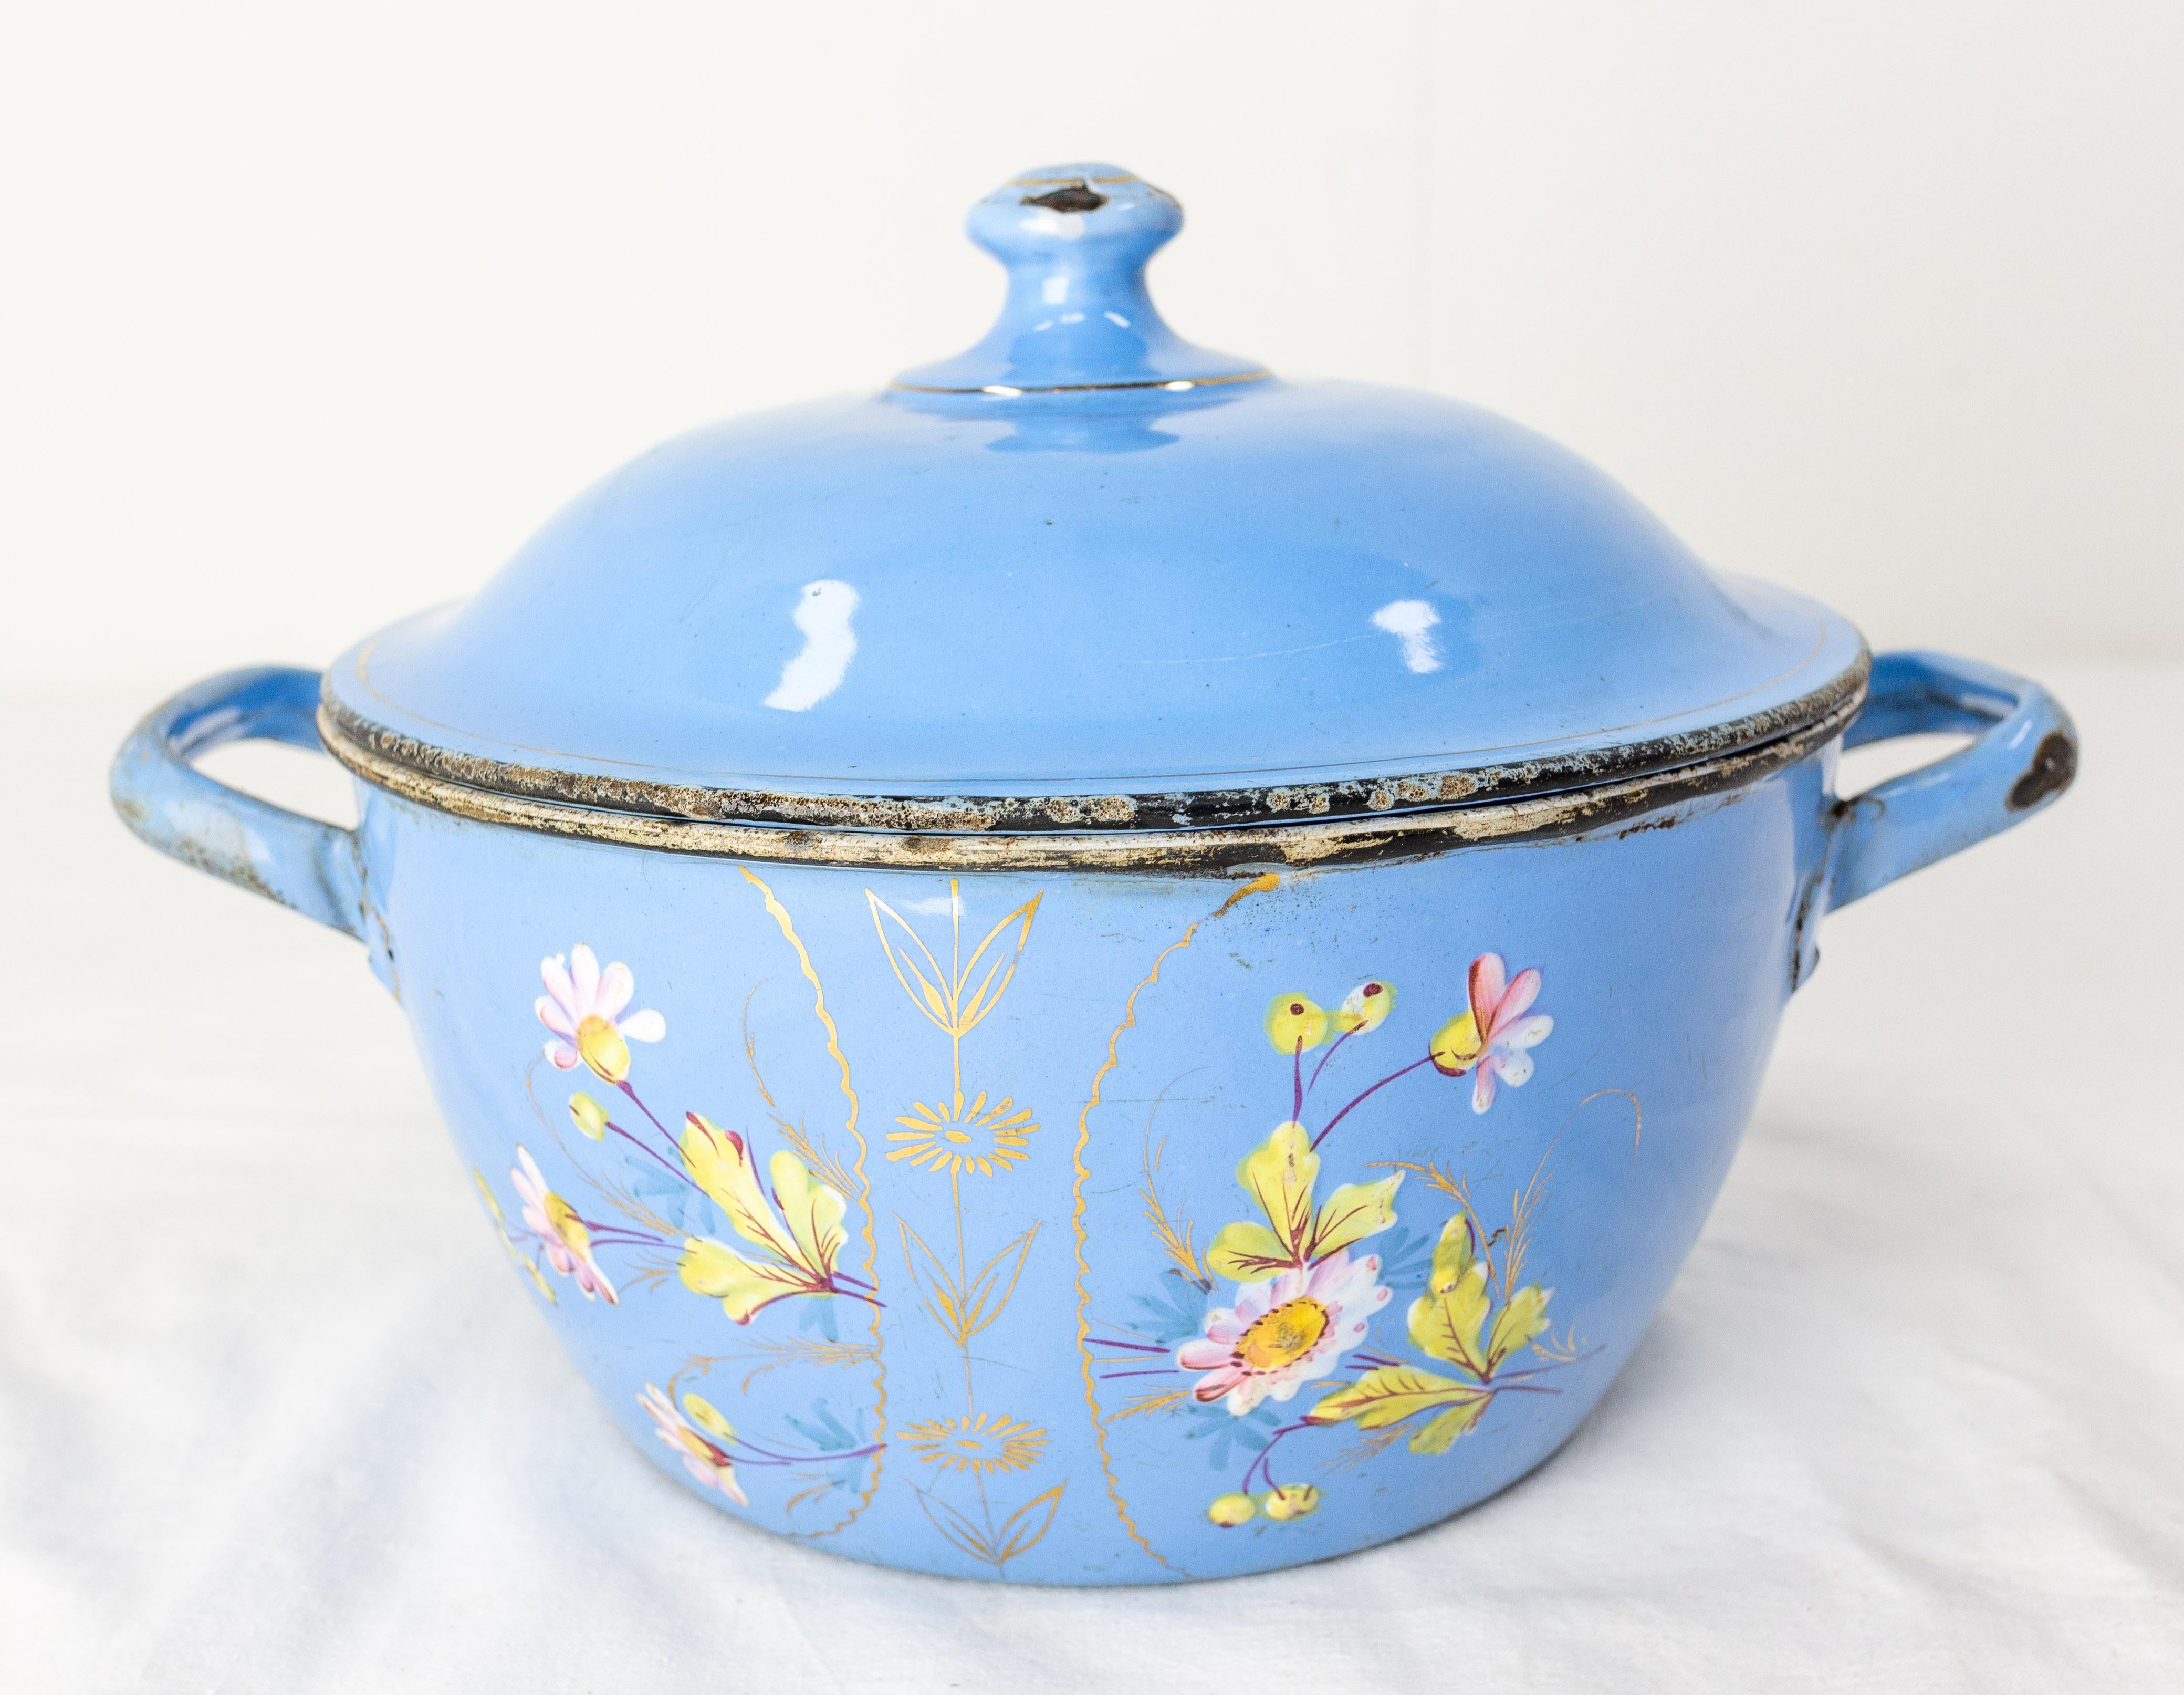 20th Century French Country Blue Soup Tureen with Floral Decoration, Enameled Iron, C. 1900 For Sale